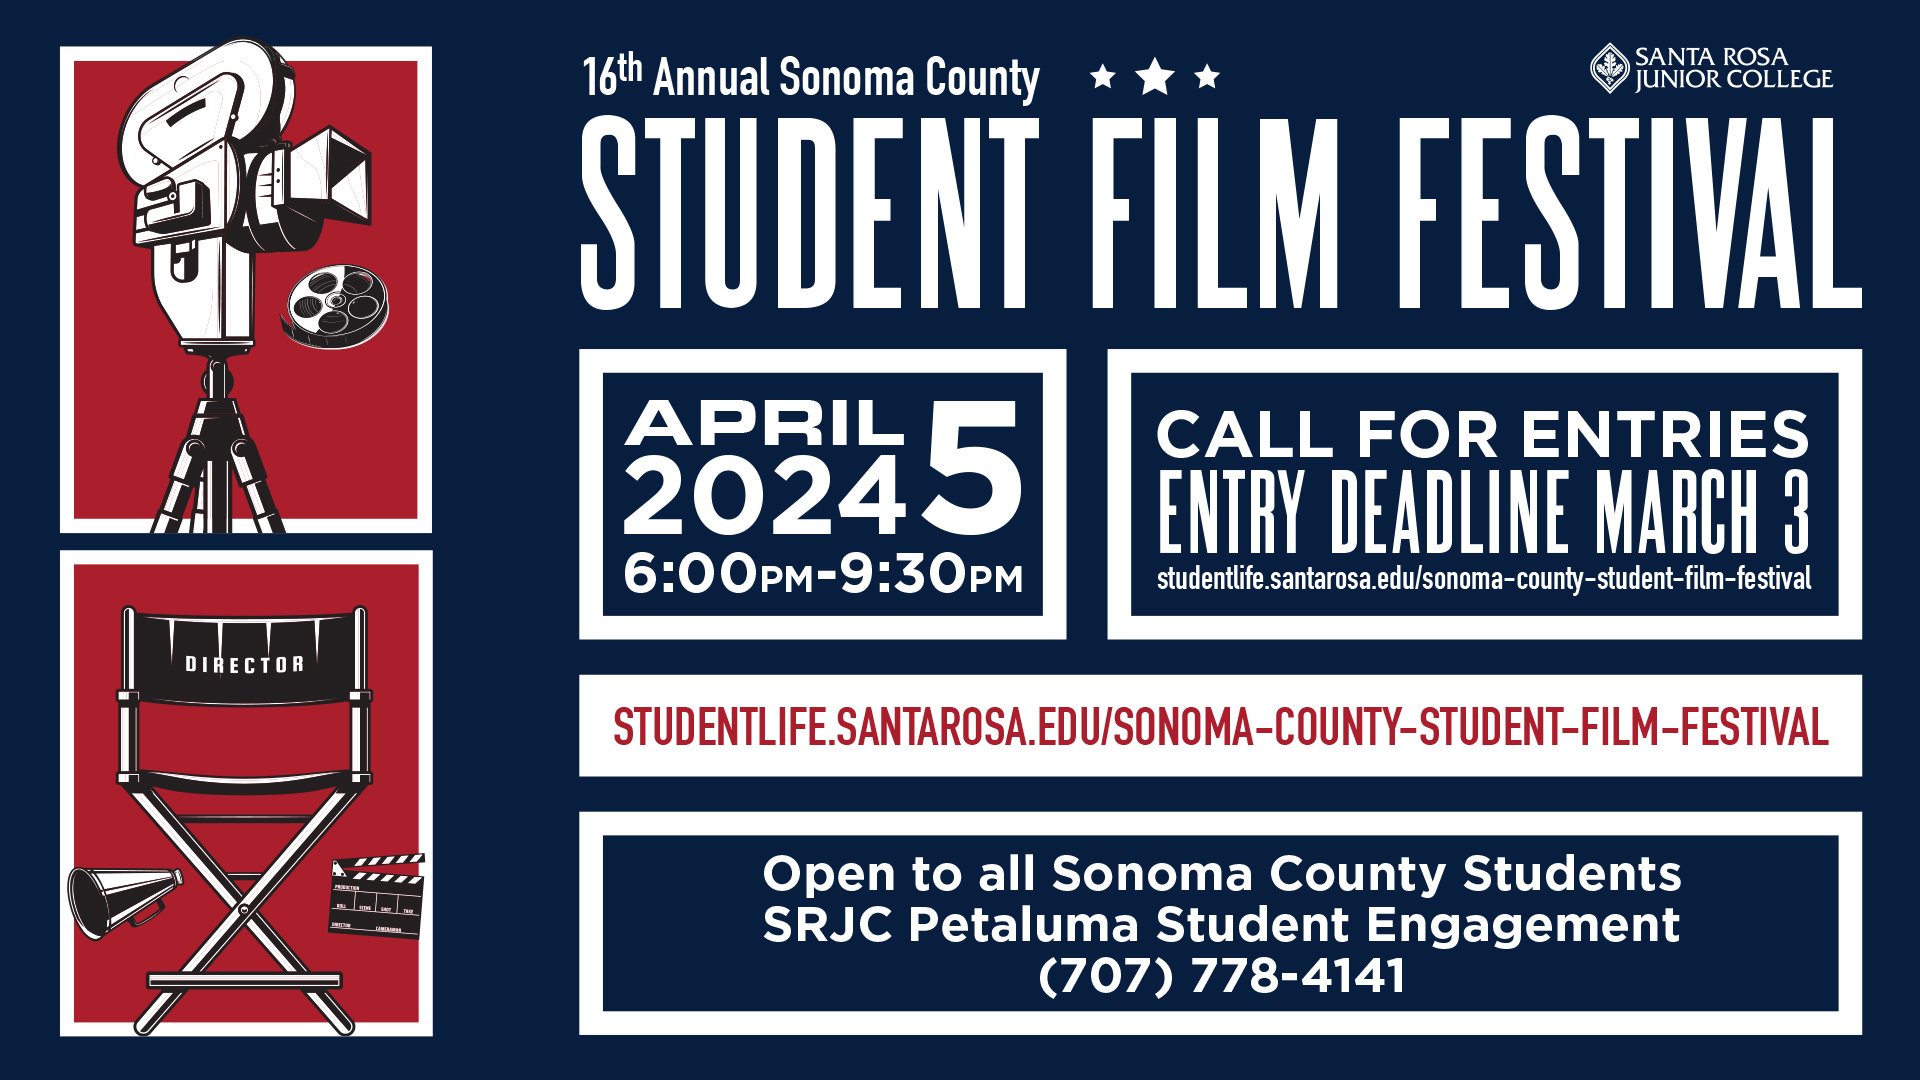 Sonoma County Student Film festival call for entries open until march 3